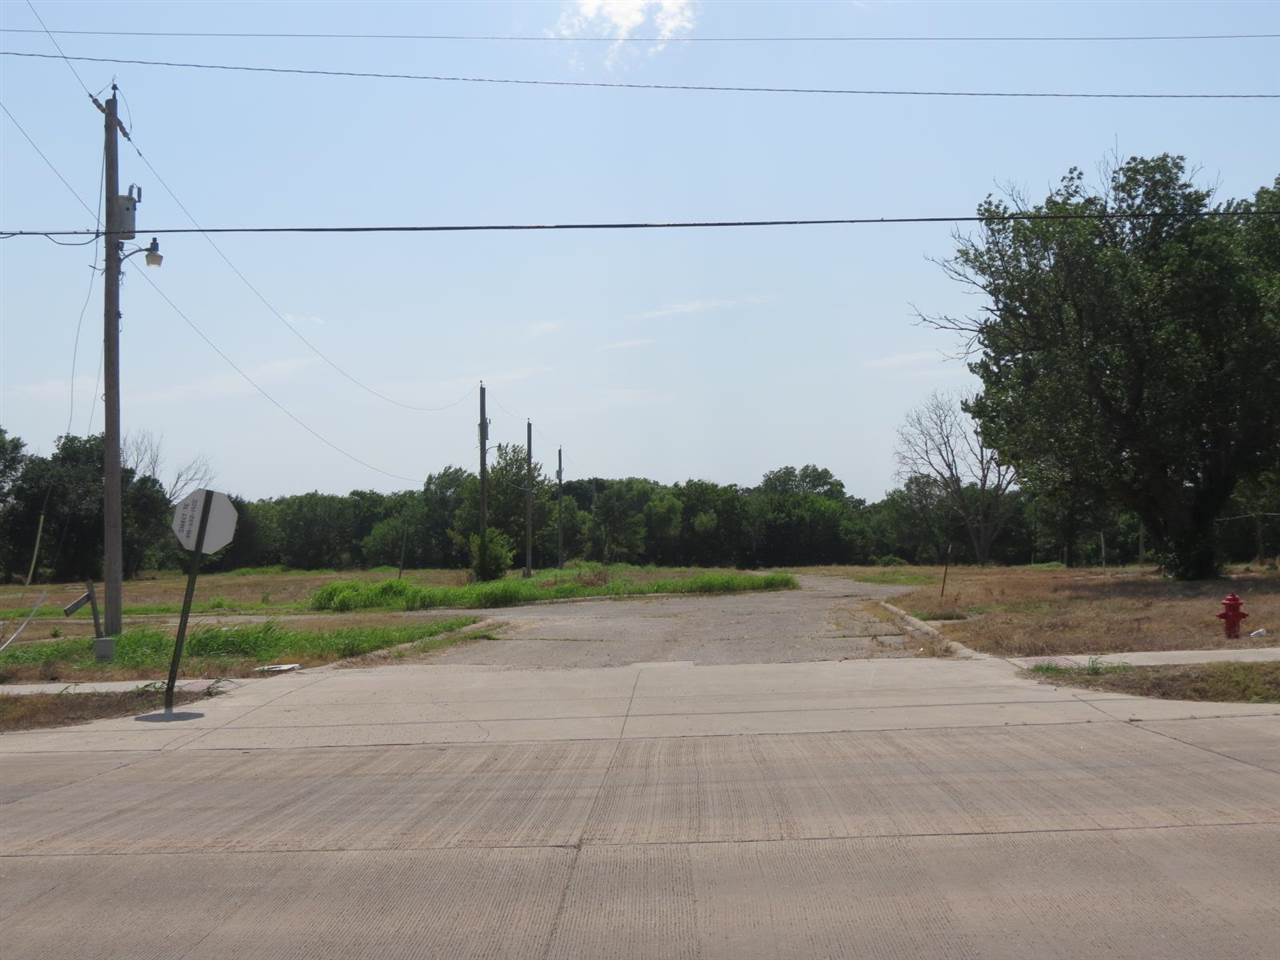 6.25 acres m/l of prime land with Frontage along Jardot Rd. Jardot has been recently paved & improved. City utilities available nearby. Prospective buyers should satisfy themselves of adequacy of utility service and suitability for development. 7th street & Payne streets are platted but not open. Contact listing agent for additional information. Drive by or walk over to view.